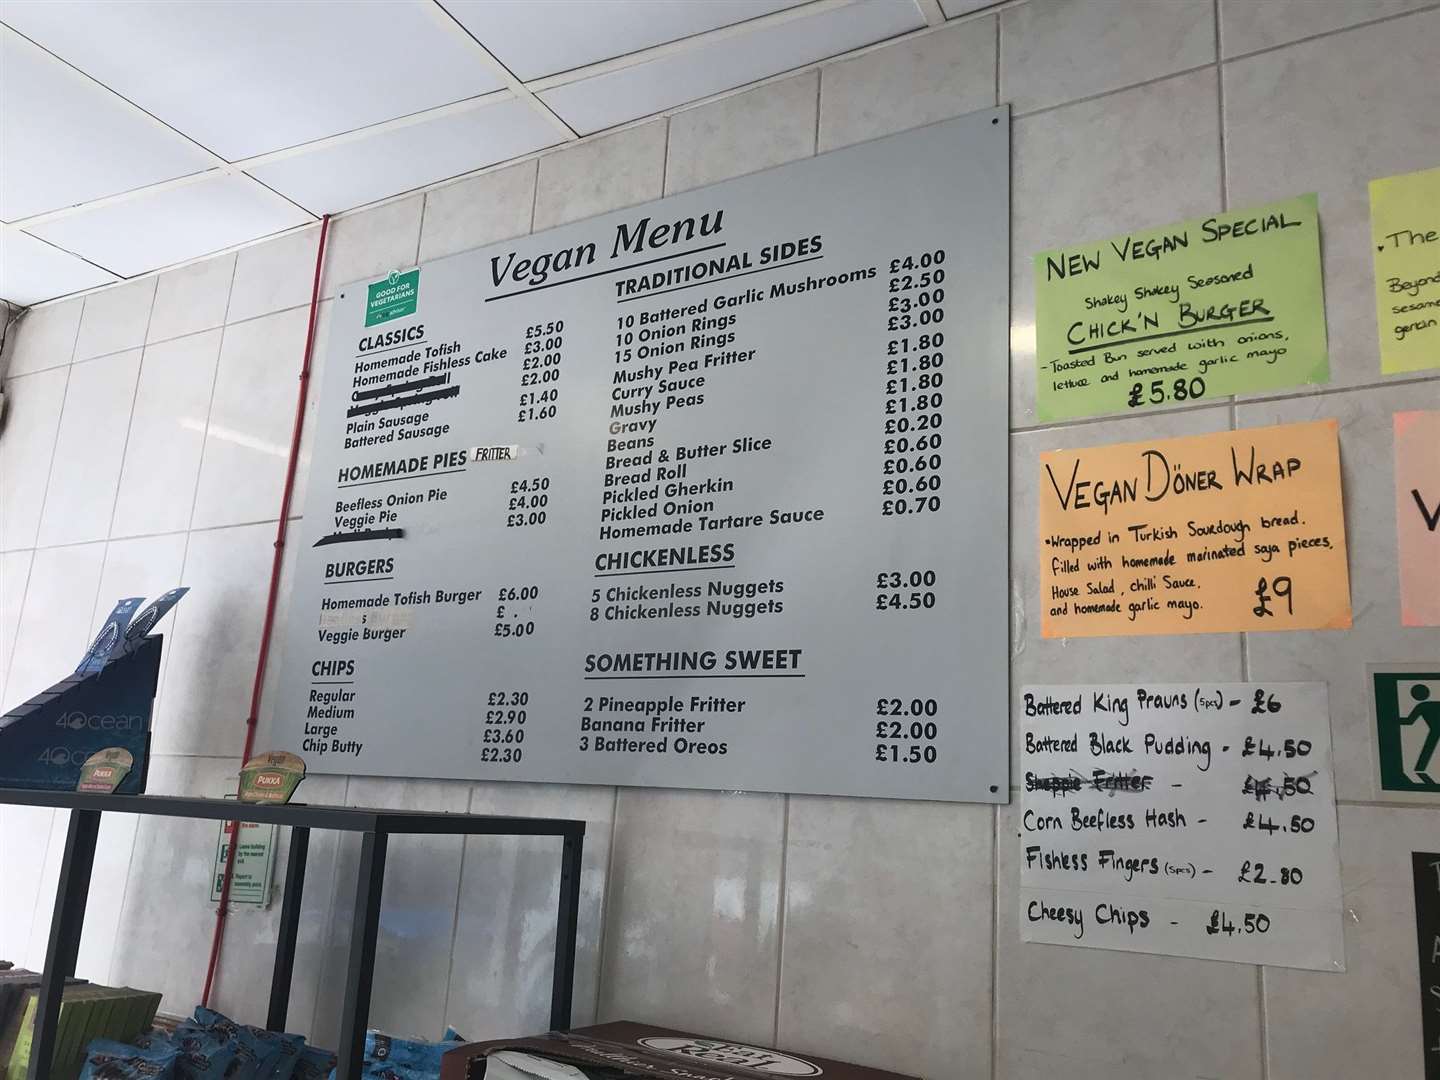 The vegan menu (the one with the regular fish and meat products is behind the counter in the traditional spot)